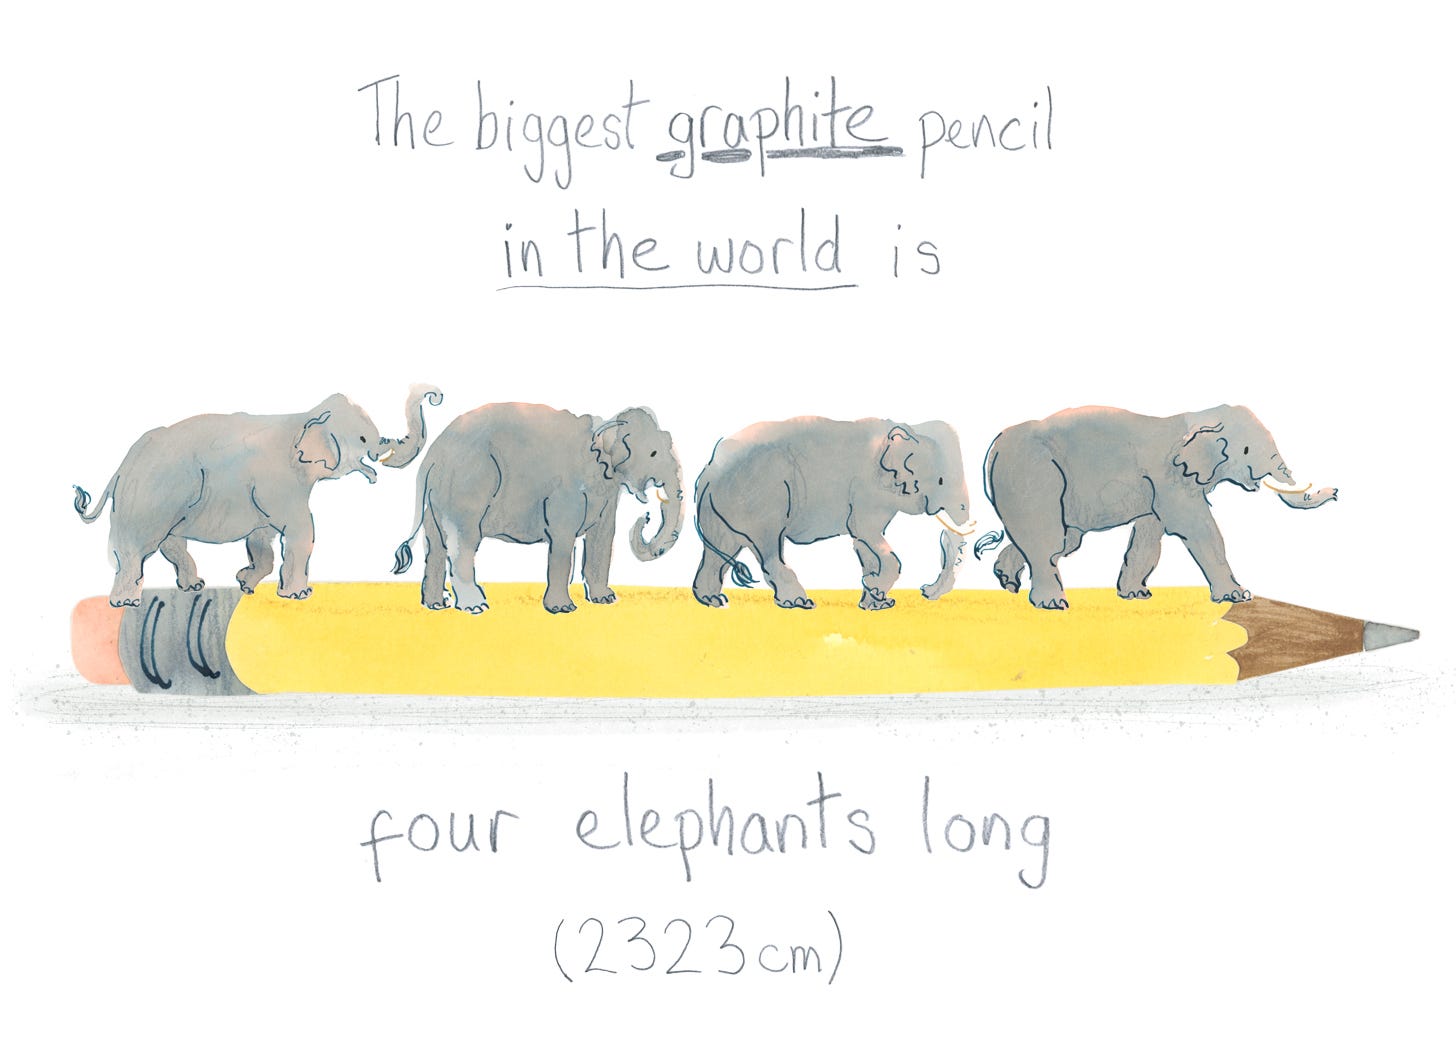 Watercolour illustration by Nanette Regan of four elephants walking across a yellow pencil. Handwritten text reads: The biggest graphite pencil in the world is four elephants long (2323cm)